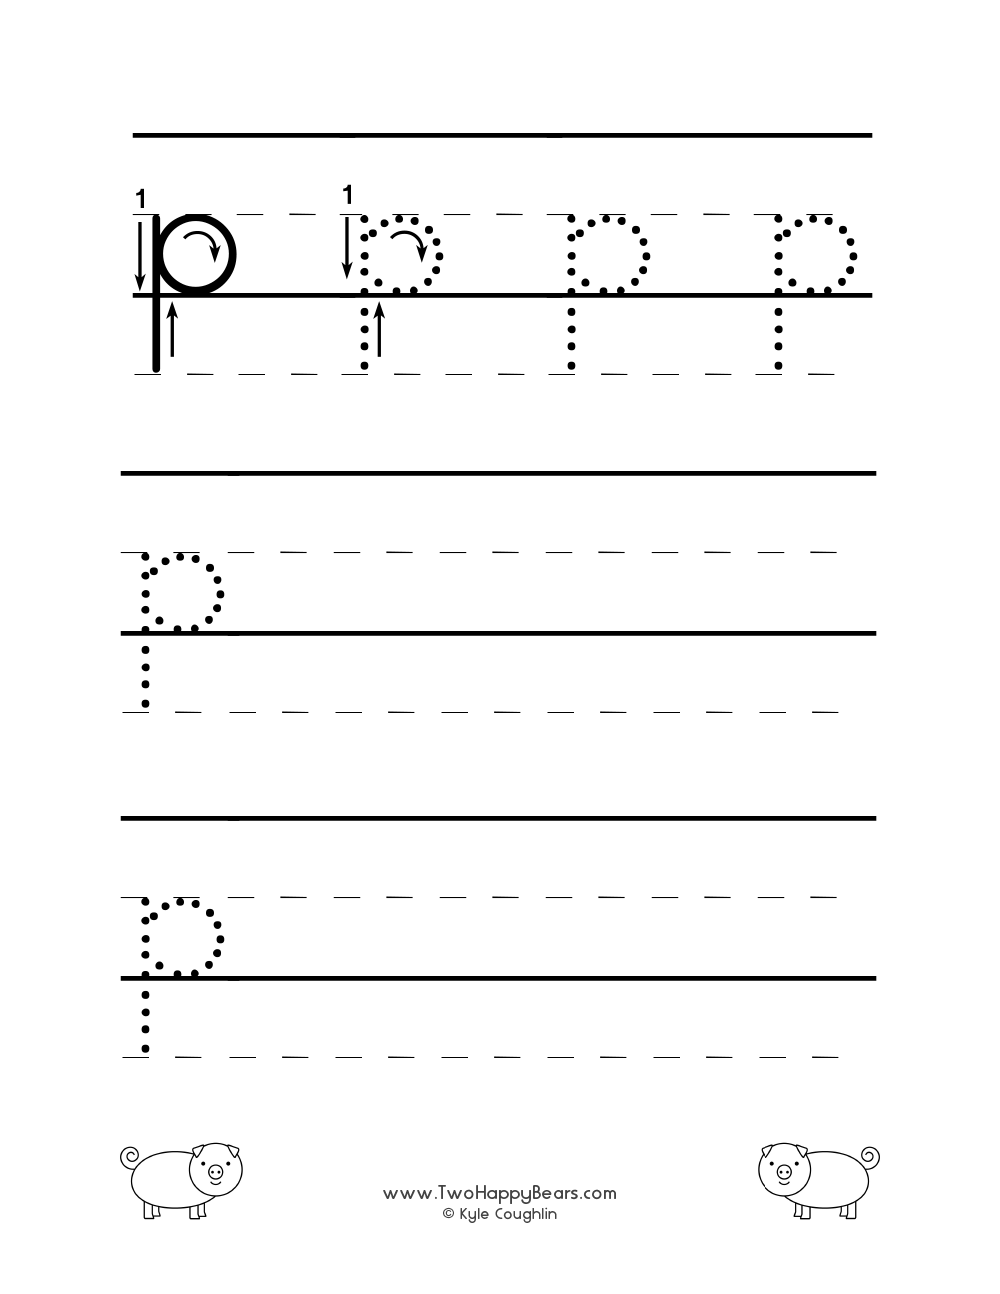 Lowercase letter P worksheet for tracing and drawing